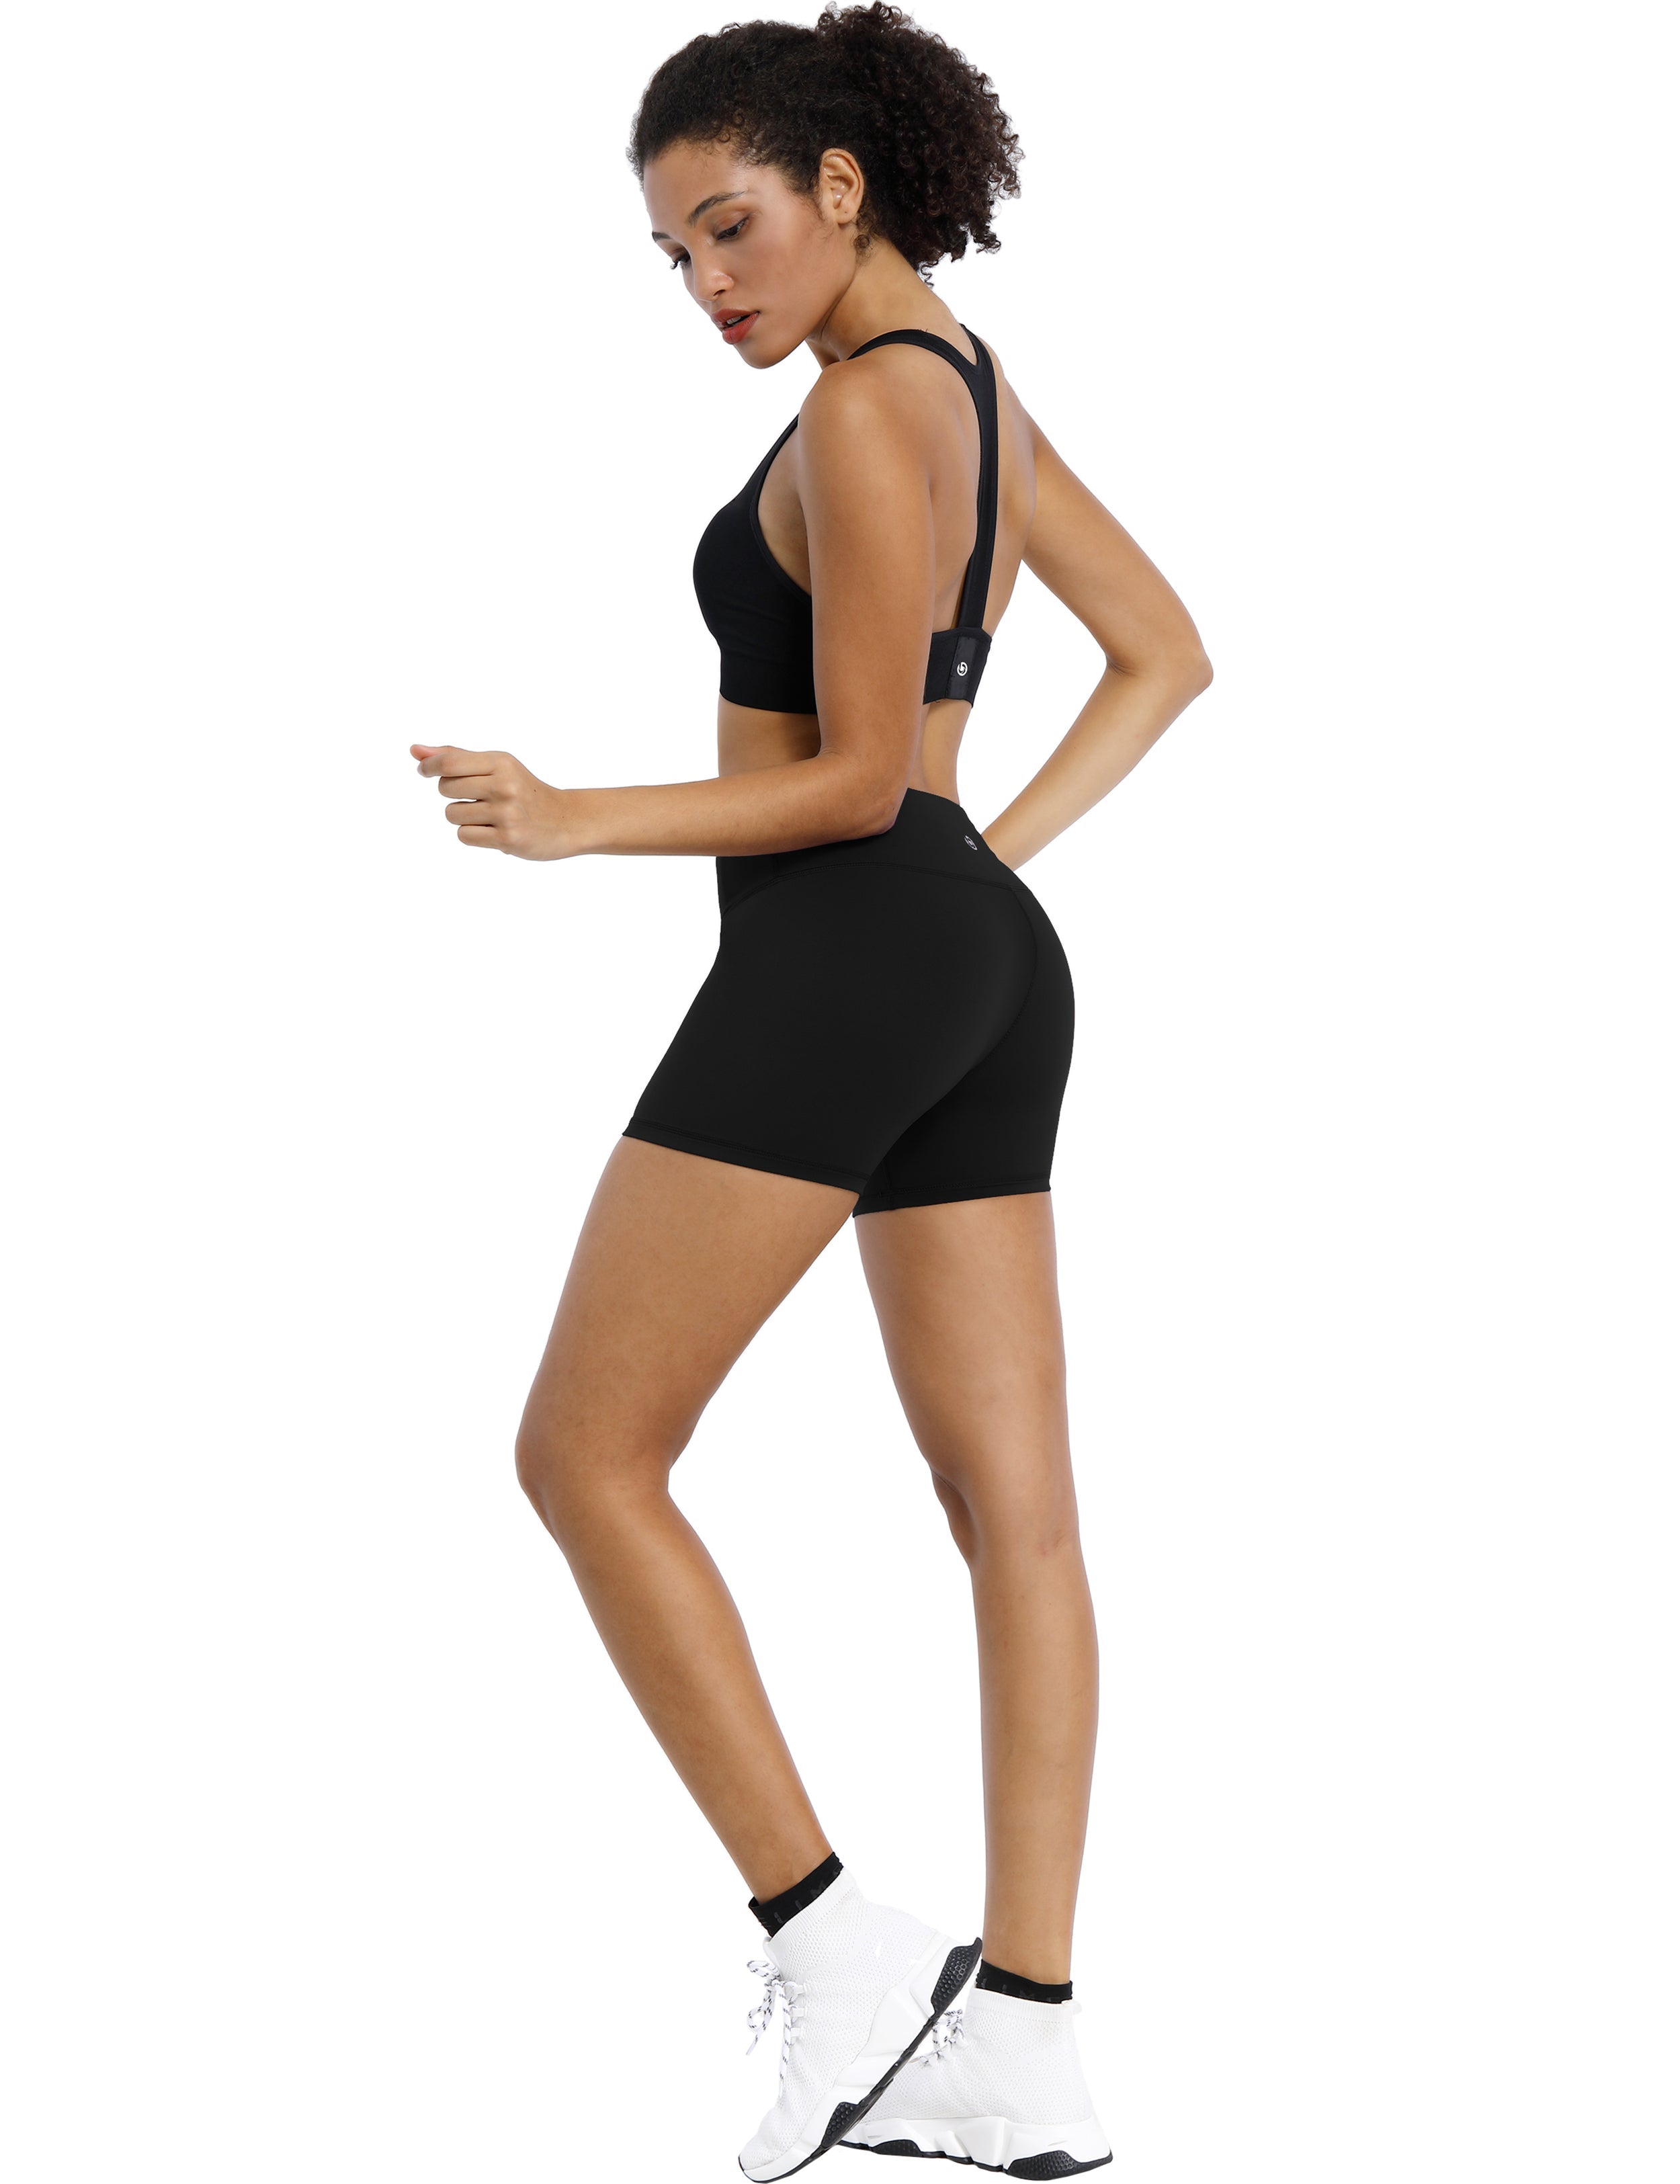 4" Jogging Shorts black Sleek, soft, smooth and totally comfortable: our newest style is here. Softest-ever fabric High elasticity High density 4-way stretch Fabric doesn't attract lint easily No see-through Moisture-wicking Machine wash 75% Nylon, 25% Spandex